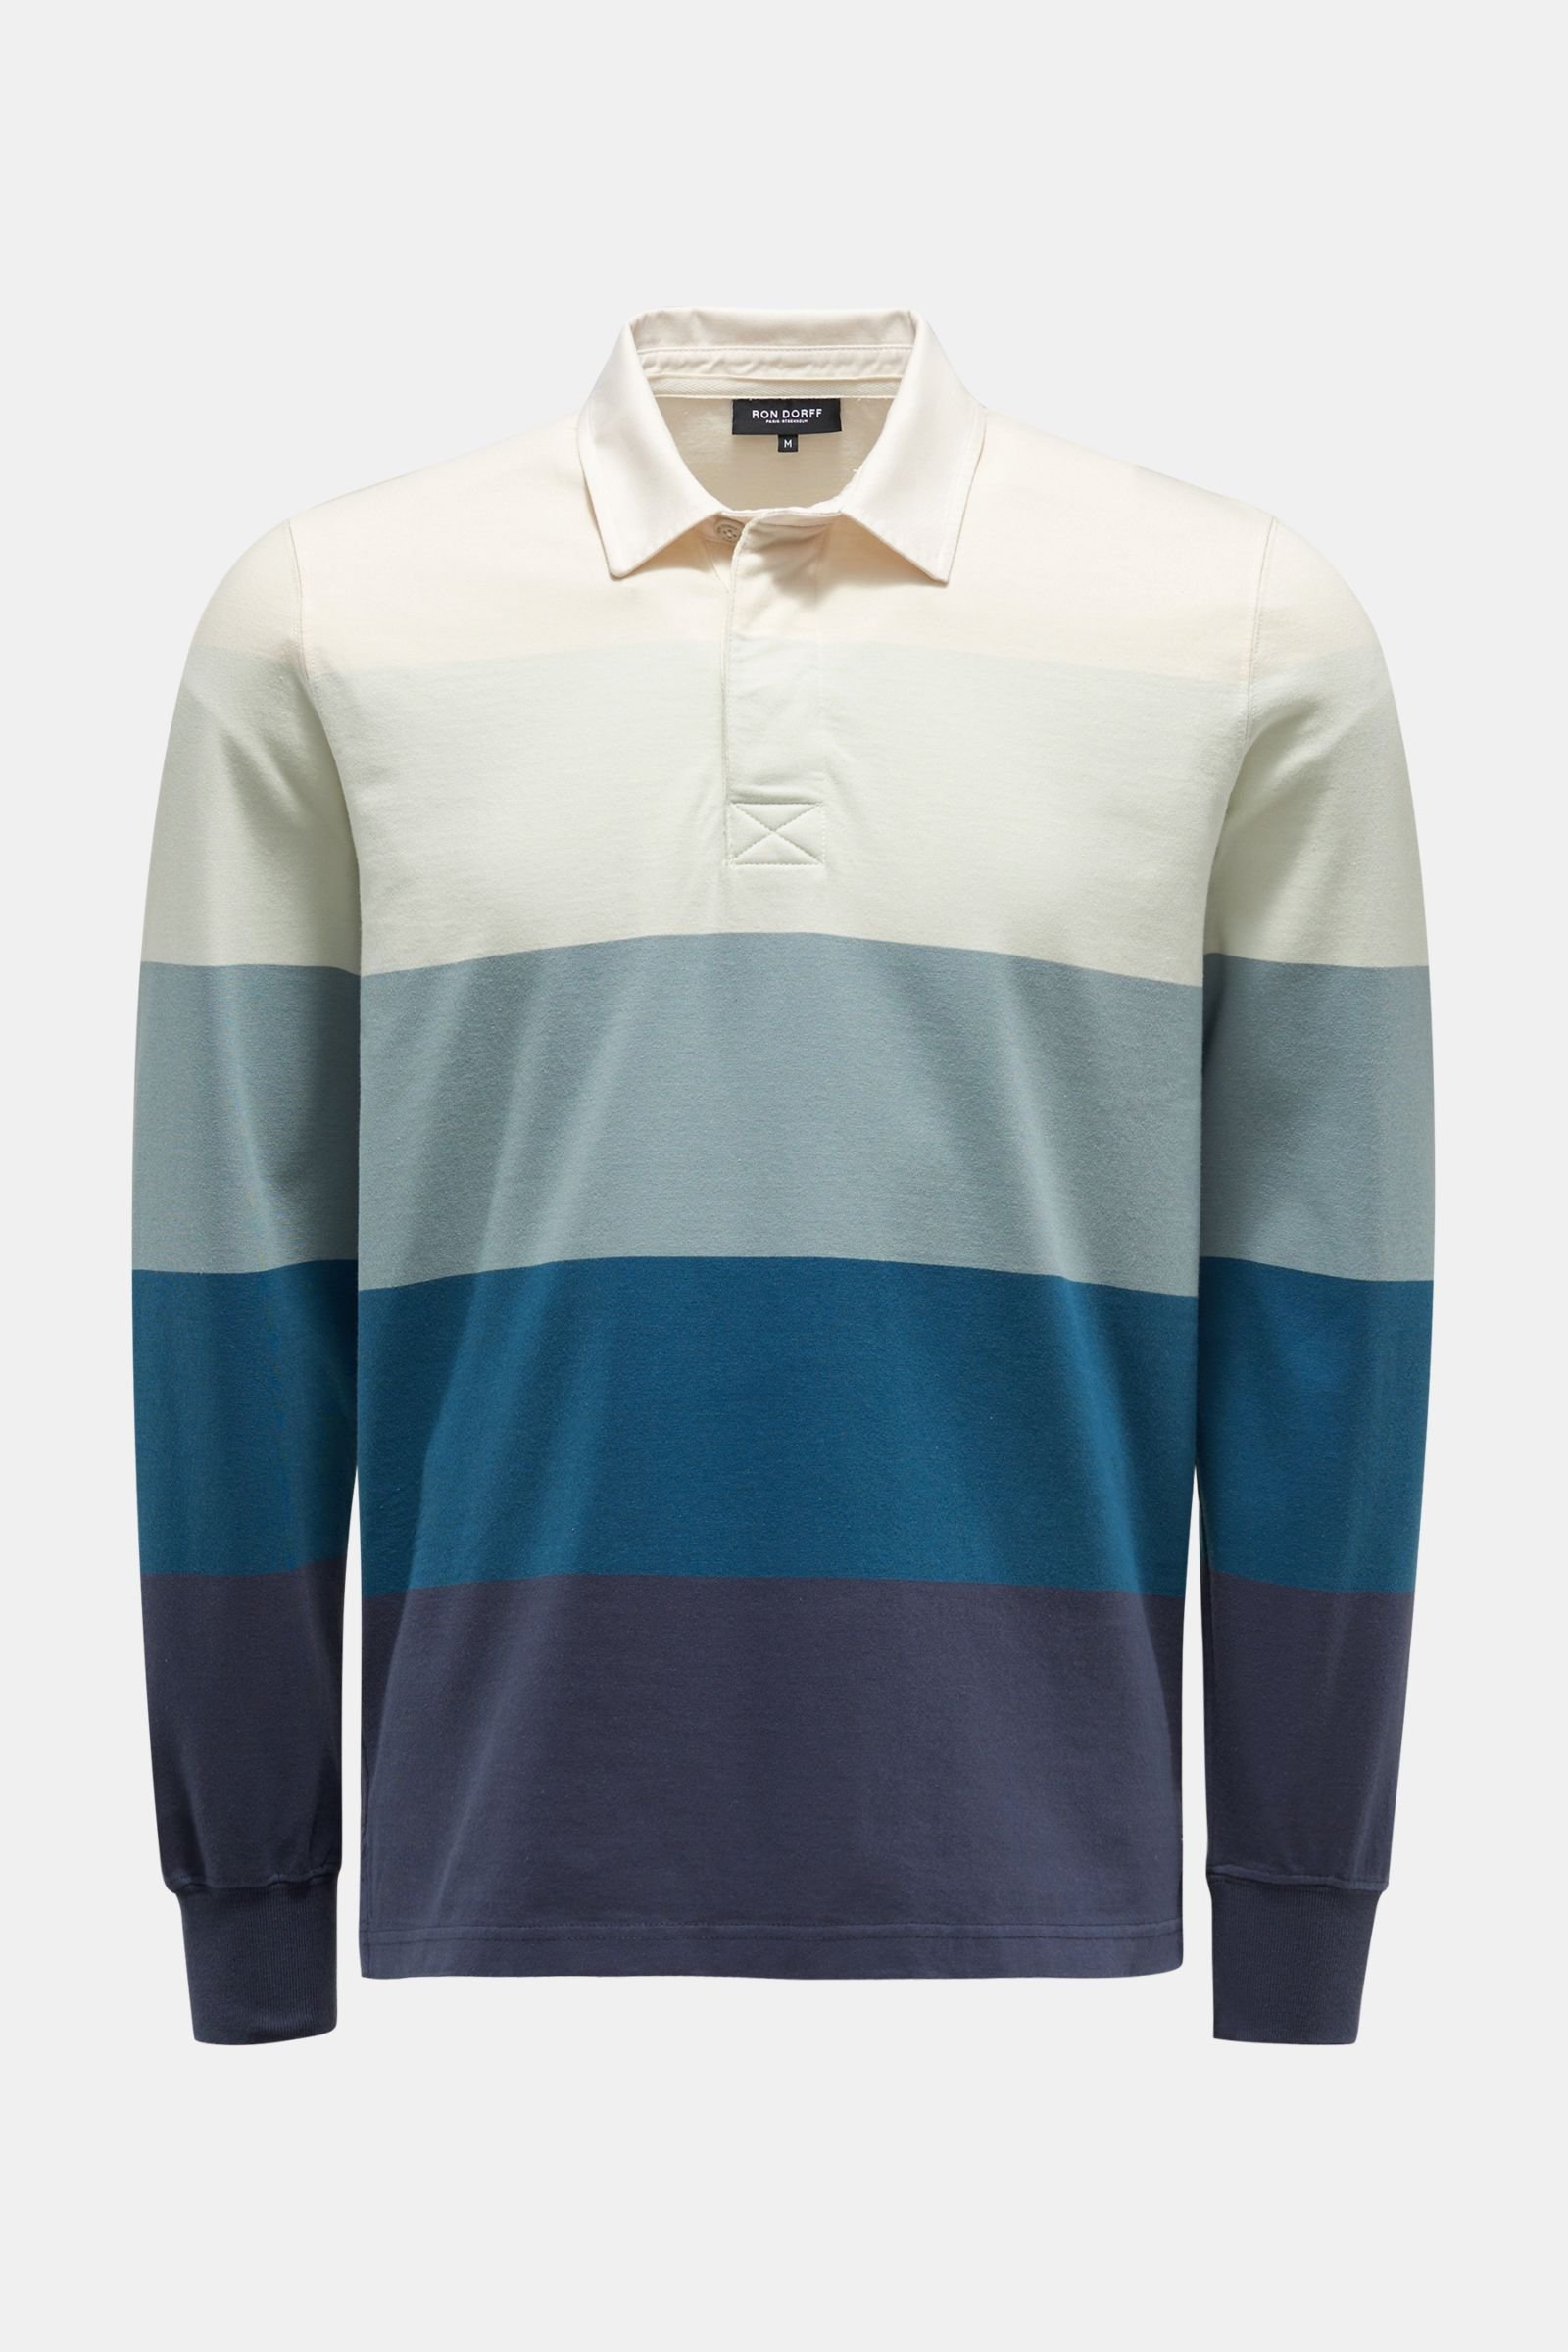 Rugby polo shirt teal/cream striped